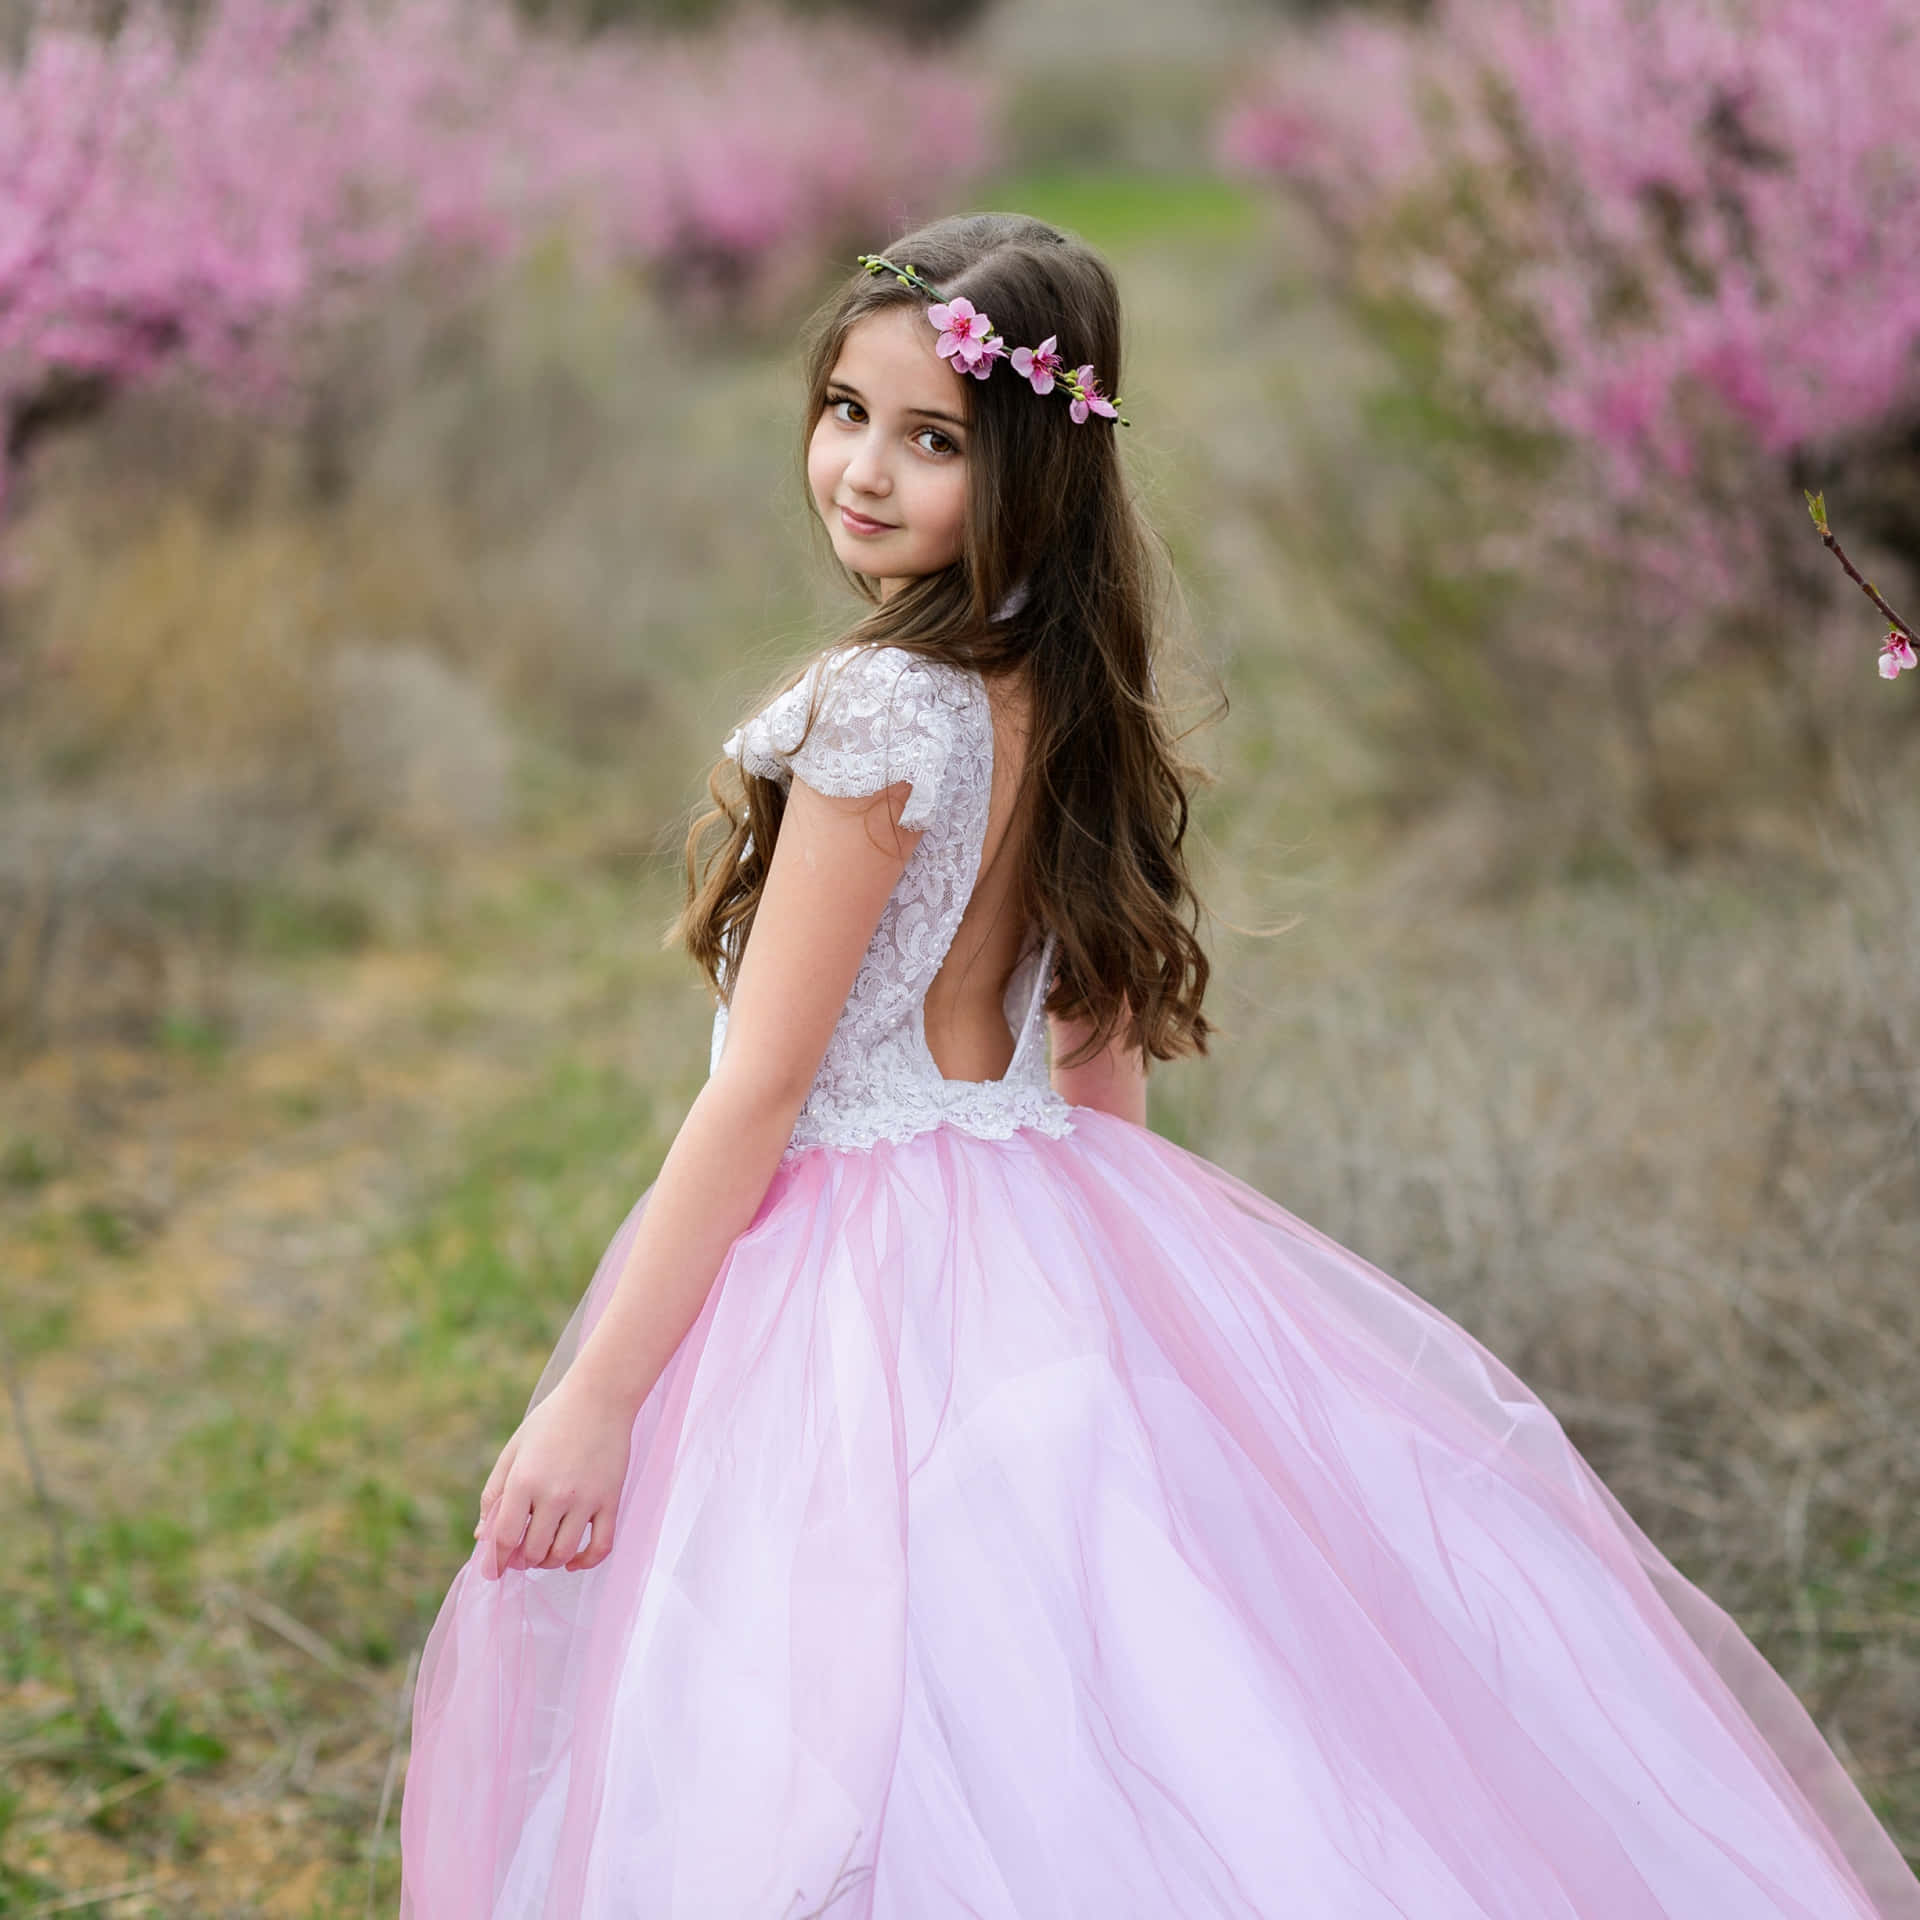 Enchanting Beauty In Pink - A Pretty Girl Adorned In A Princess Dress